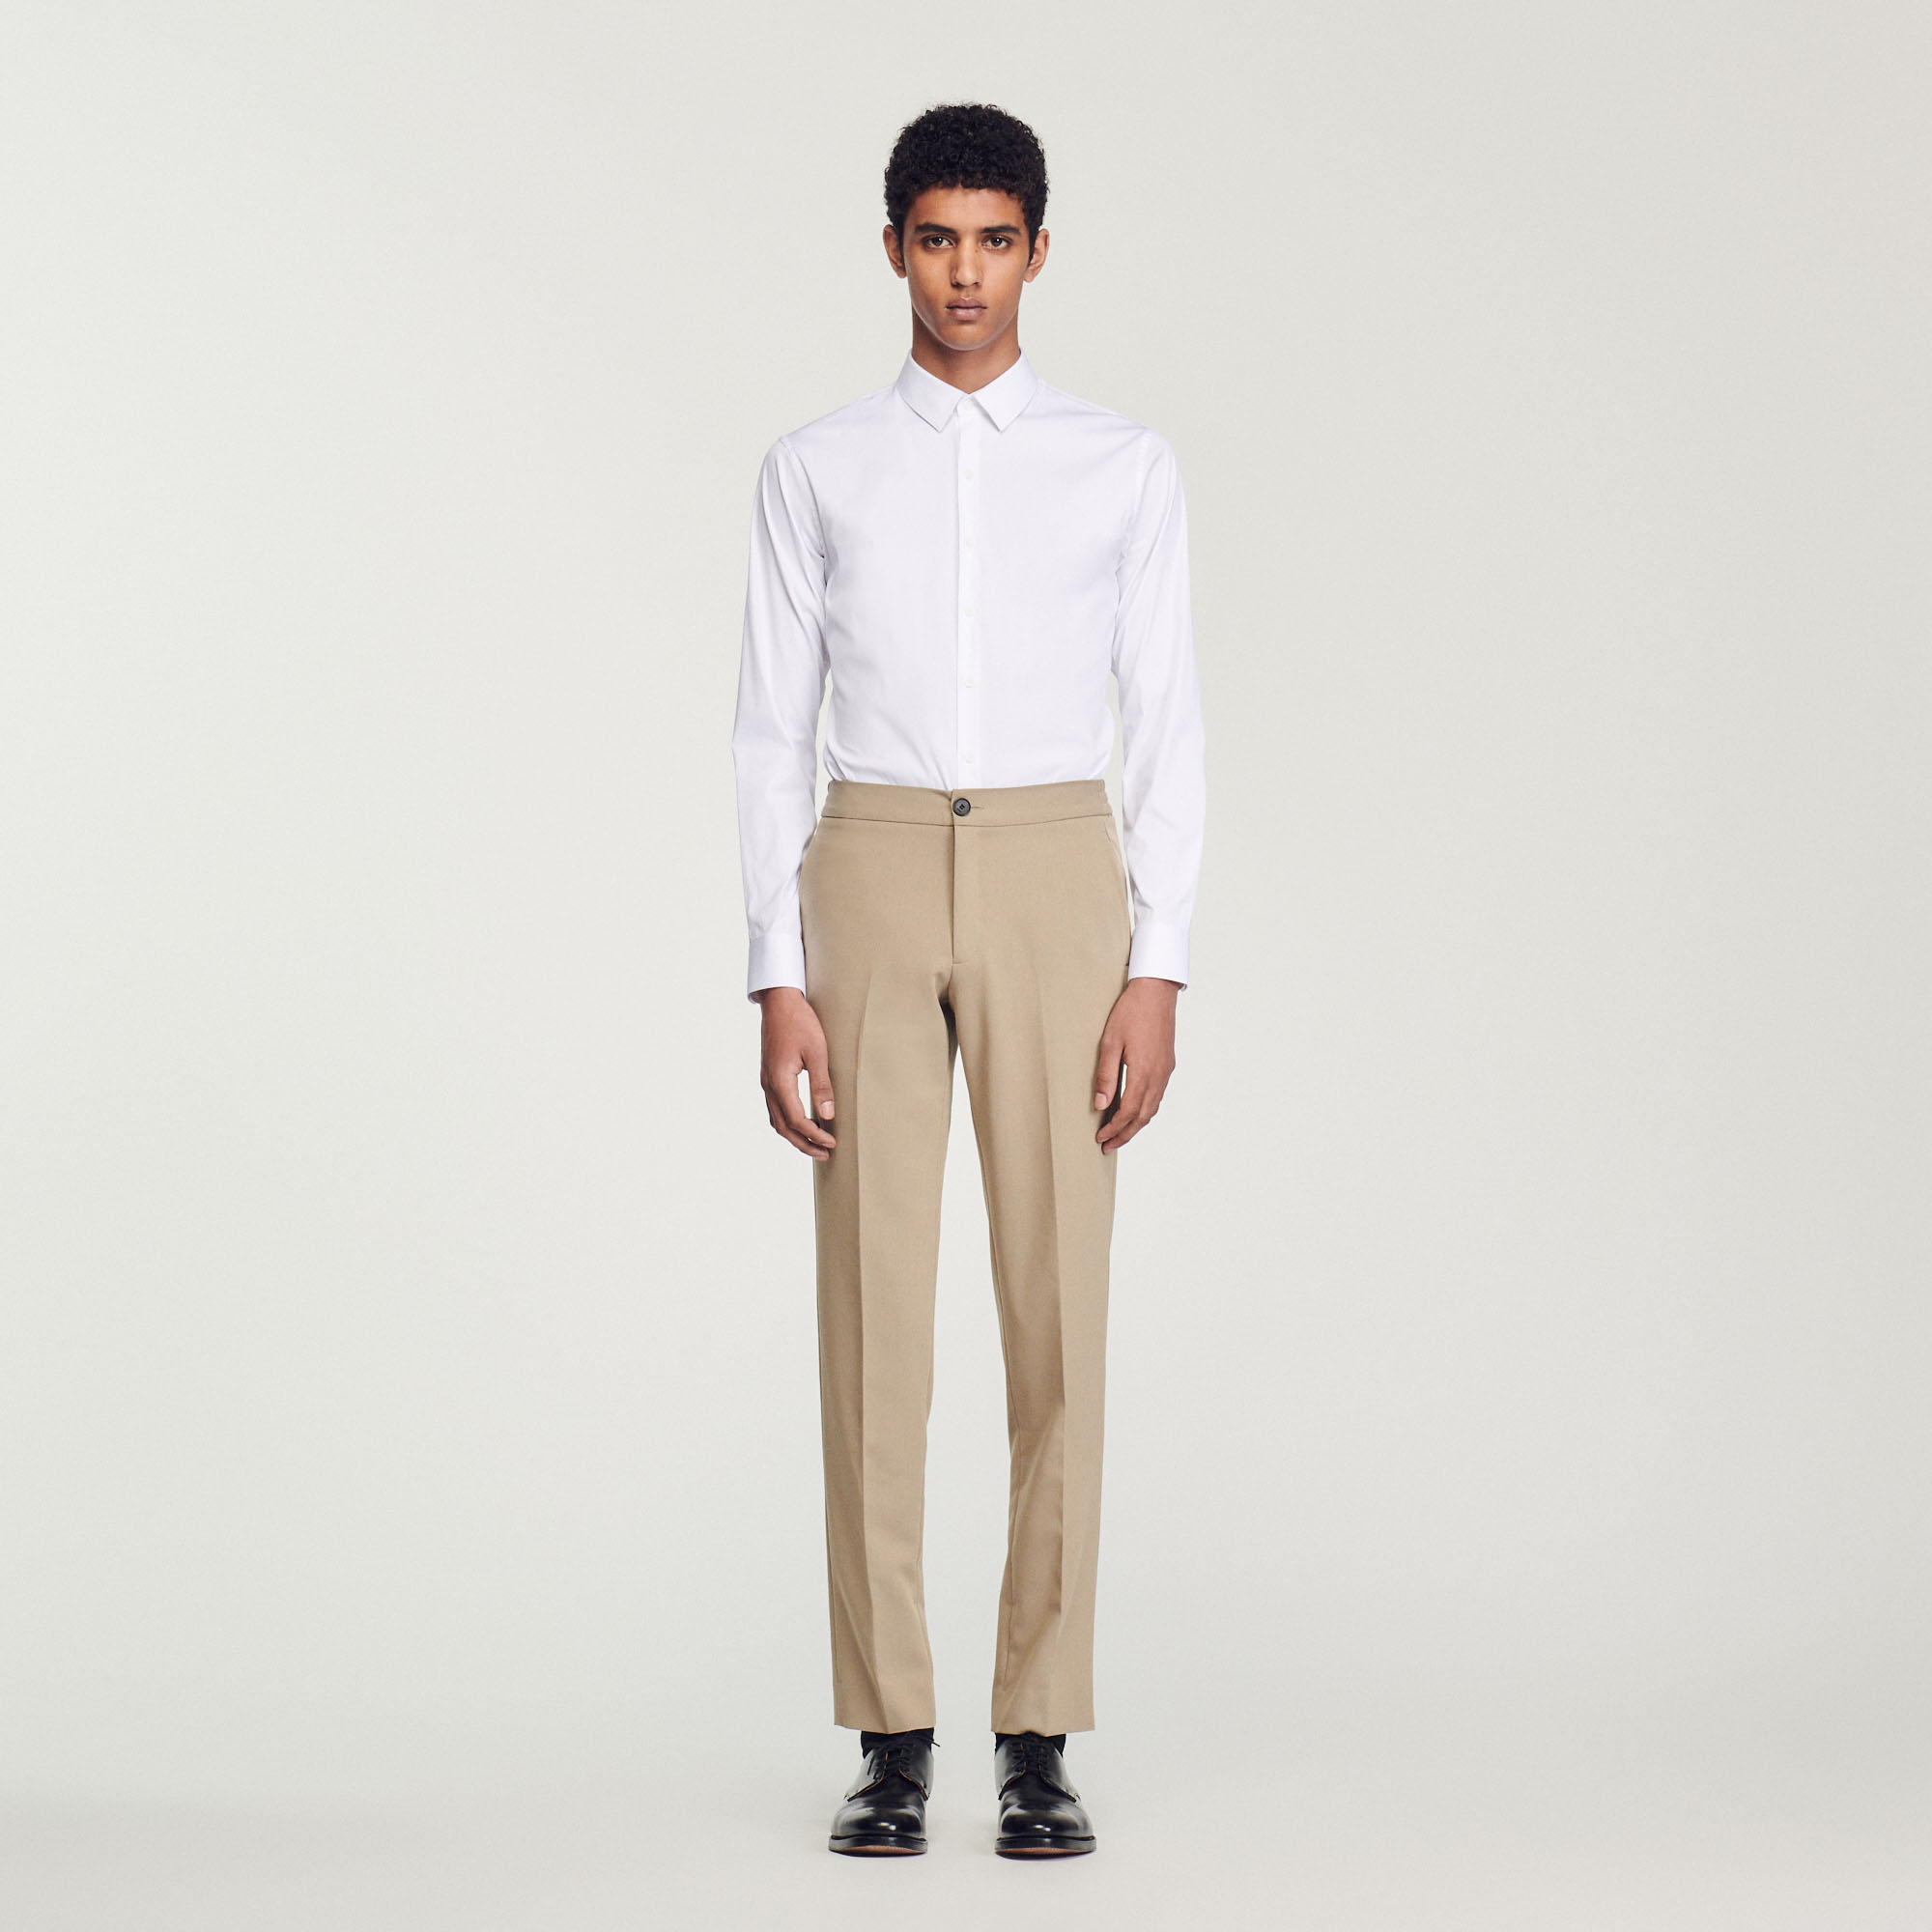 Sandro cotton Fitted stretch cotton shirt with long sleeves, buttoned cuffs, a classic collar, and a button fastening